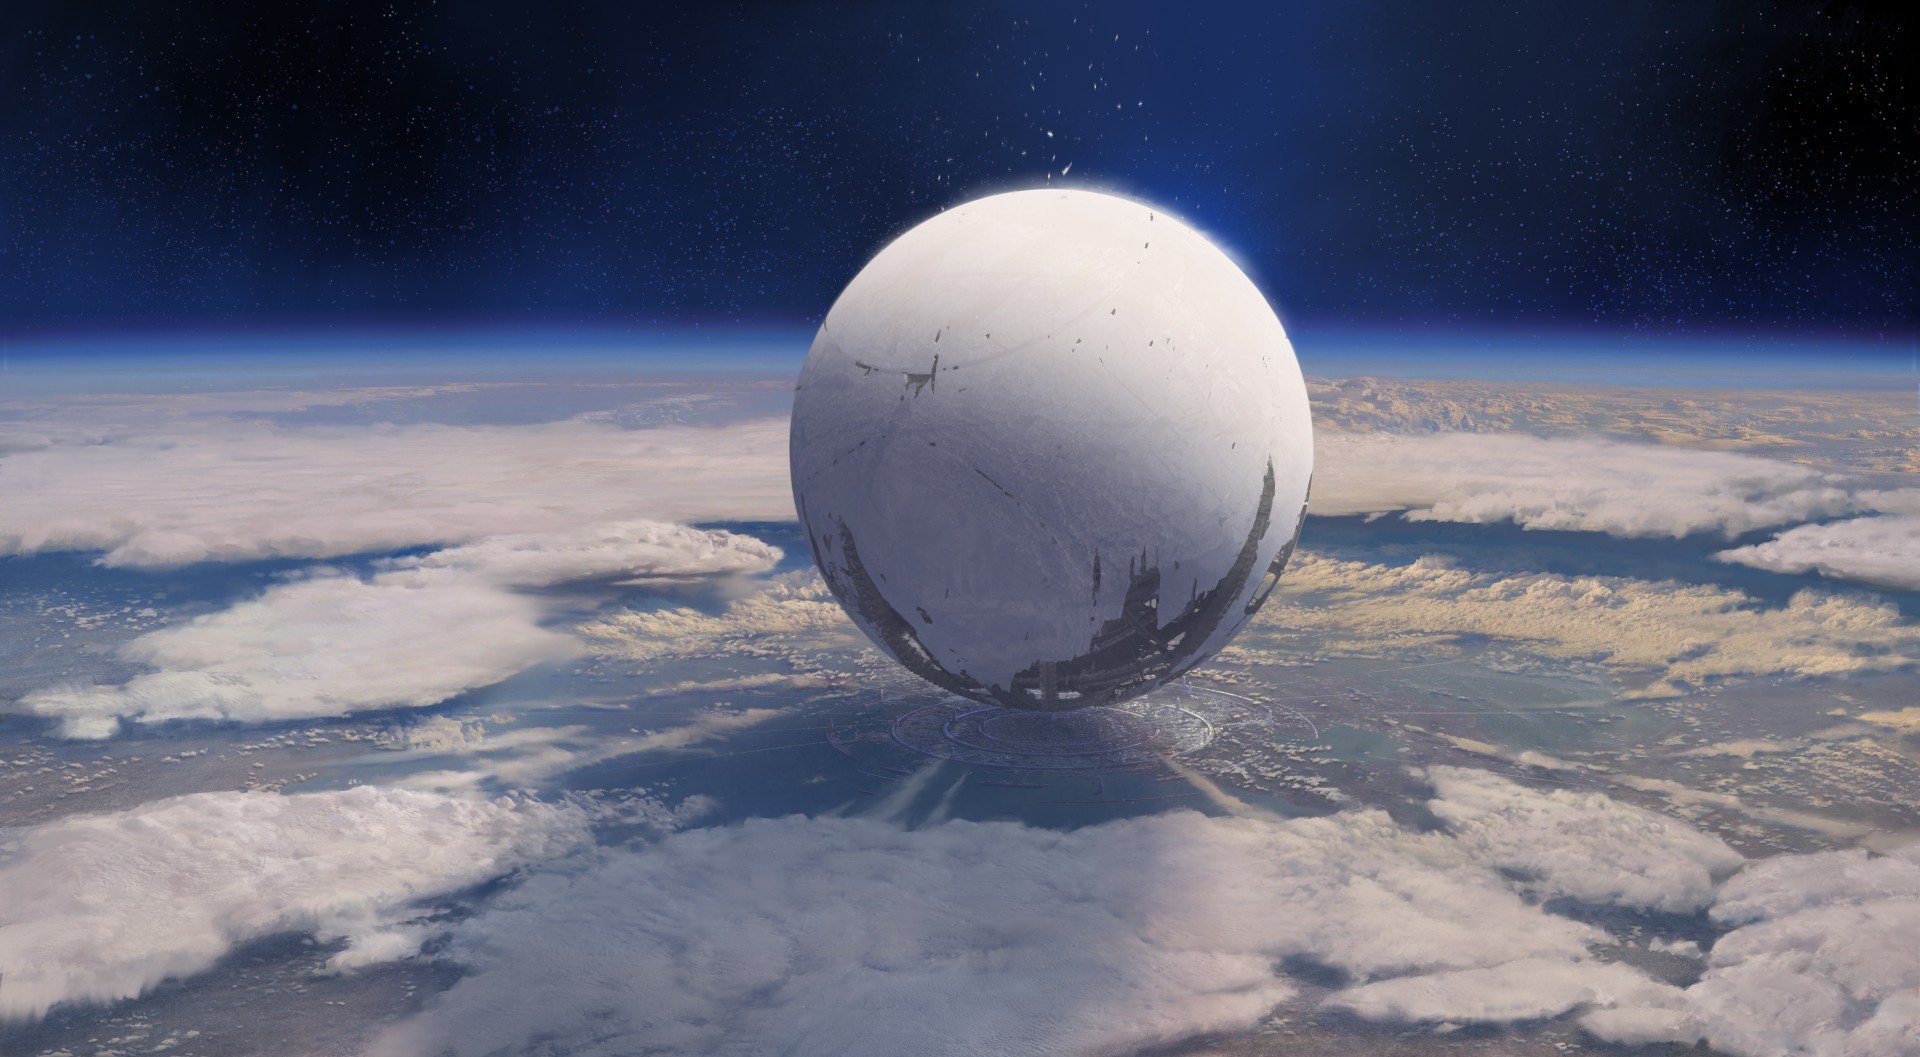 Bungie Disregarding the Masses by Not Bringing “Destiny” to PC - A Look Into Their Reasoning